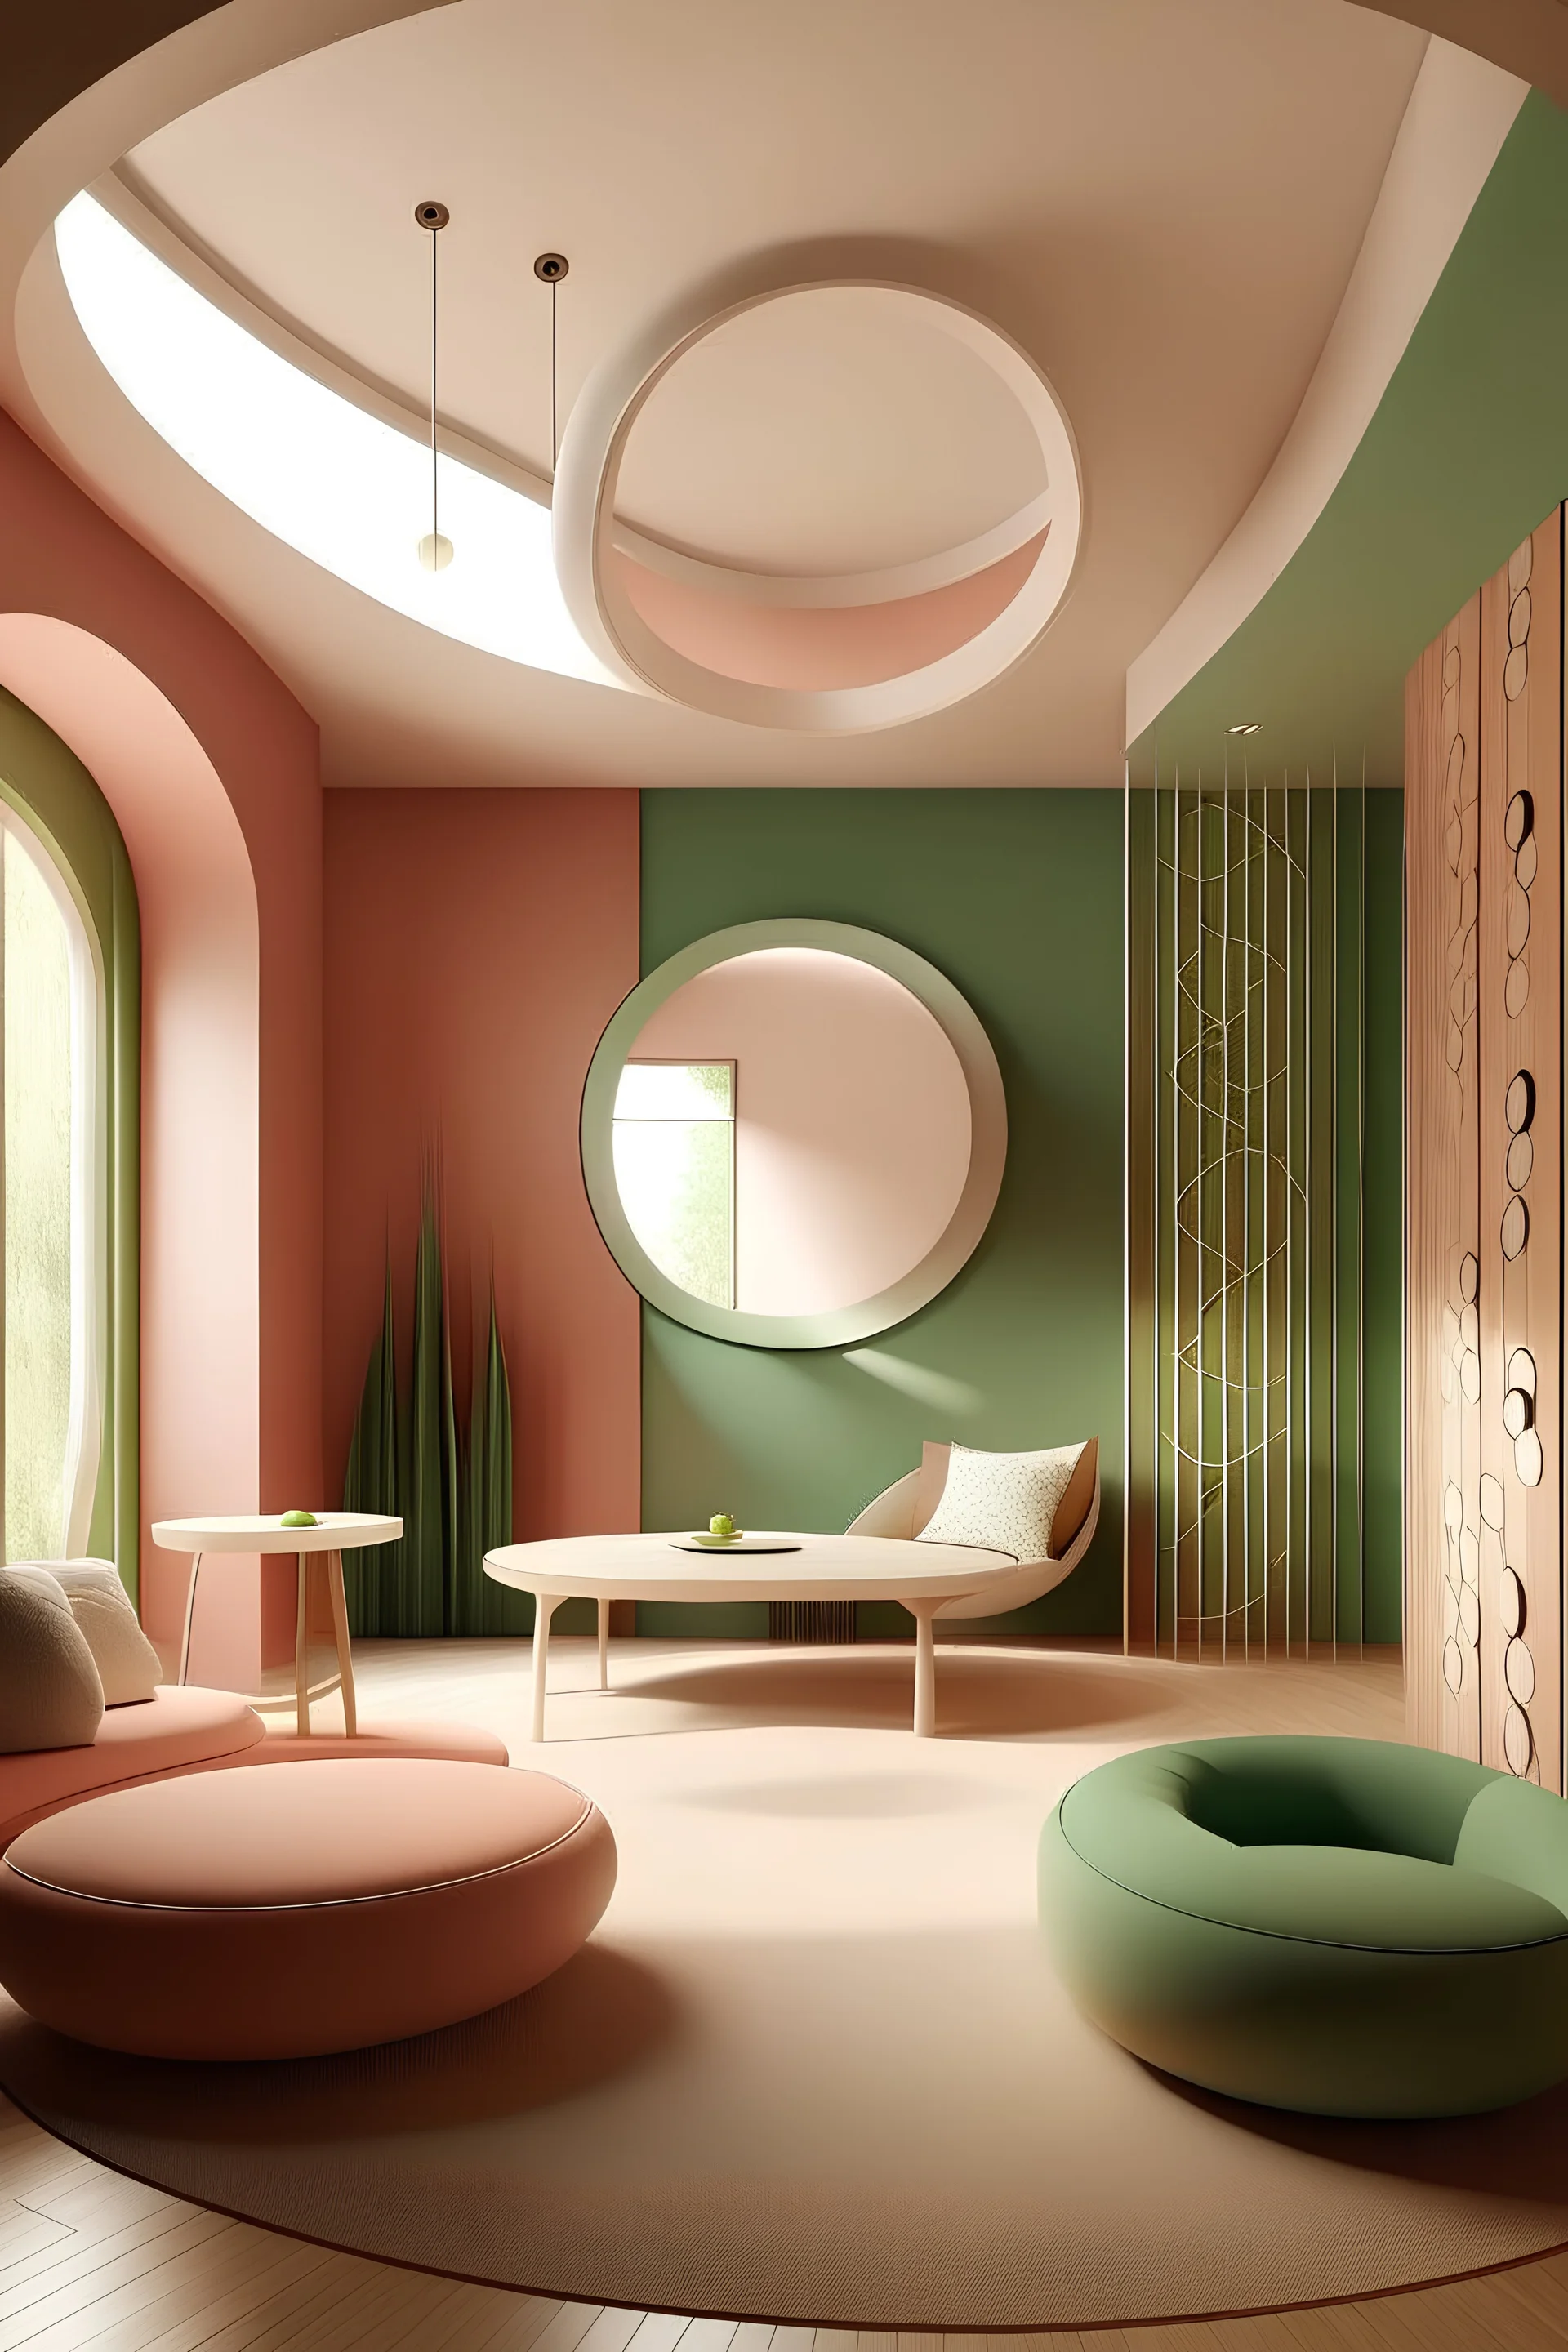 room design with circles and curves